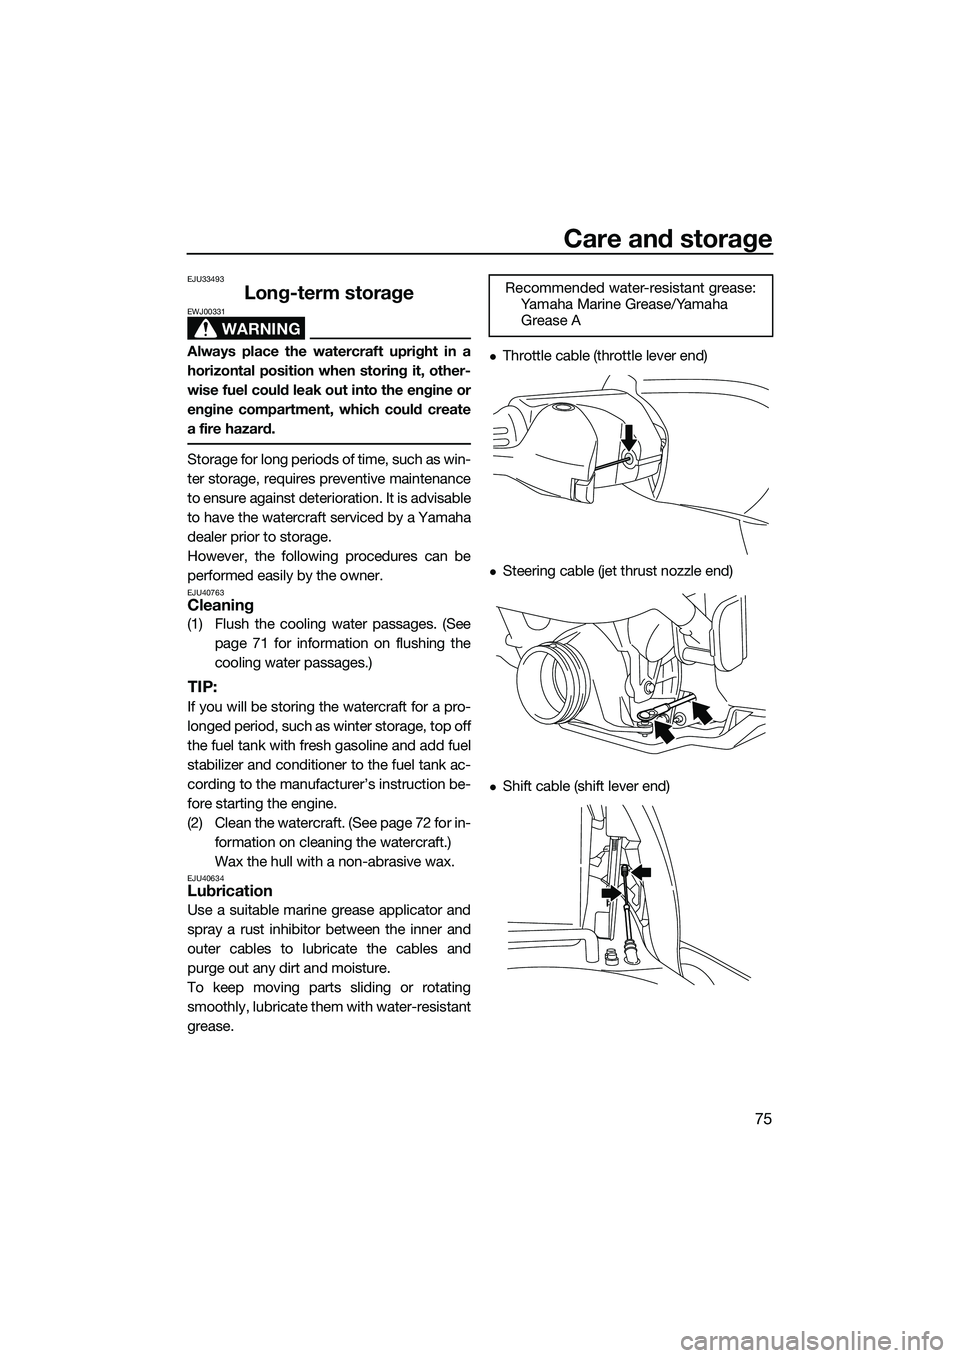 YAMAHA VXR 2014  Owners Manual Care and storage
75
EJU33493
Long-term storage
WARNING
EWJ00331
Always place the watercraft upright in a
horizontal position when storing it, other-
wise fuel could leak out into the engine or
engine 